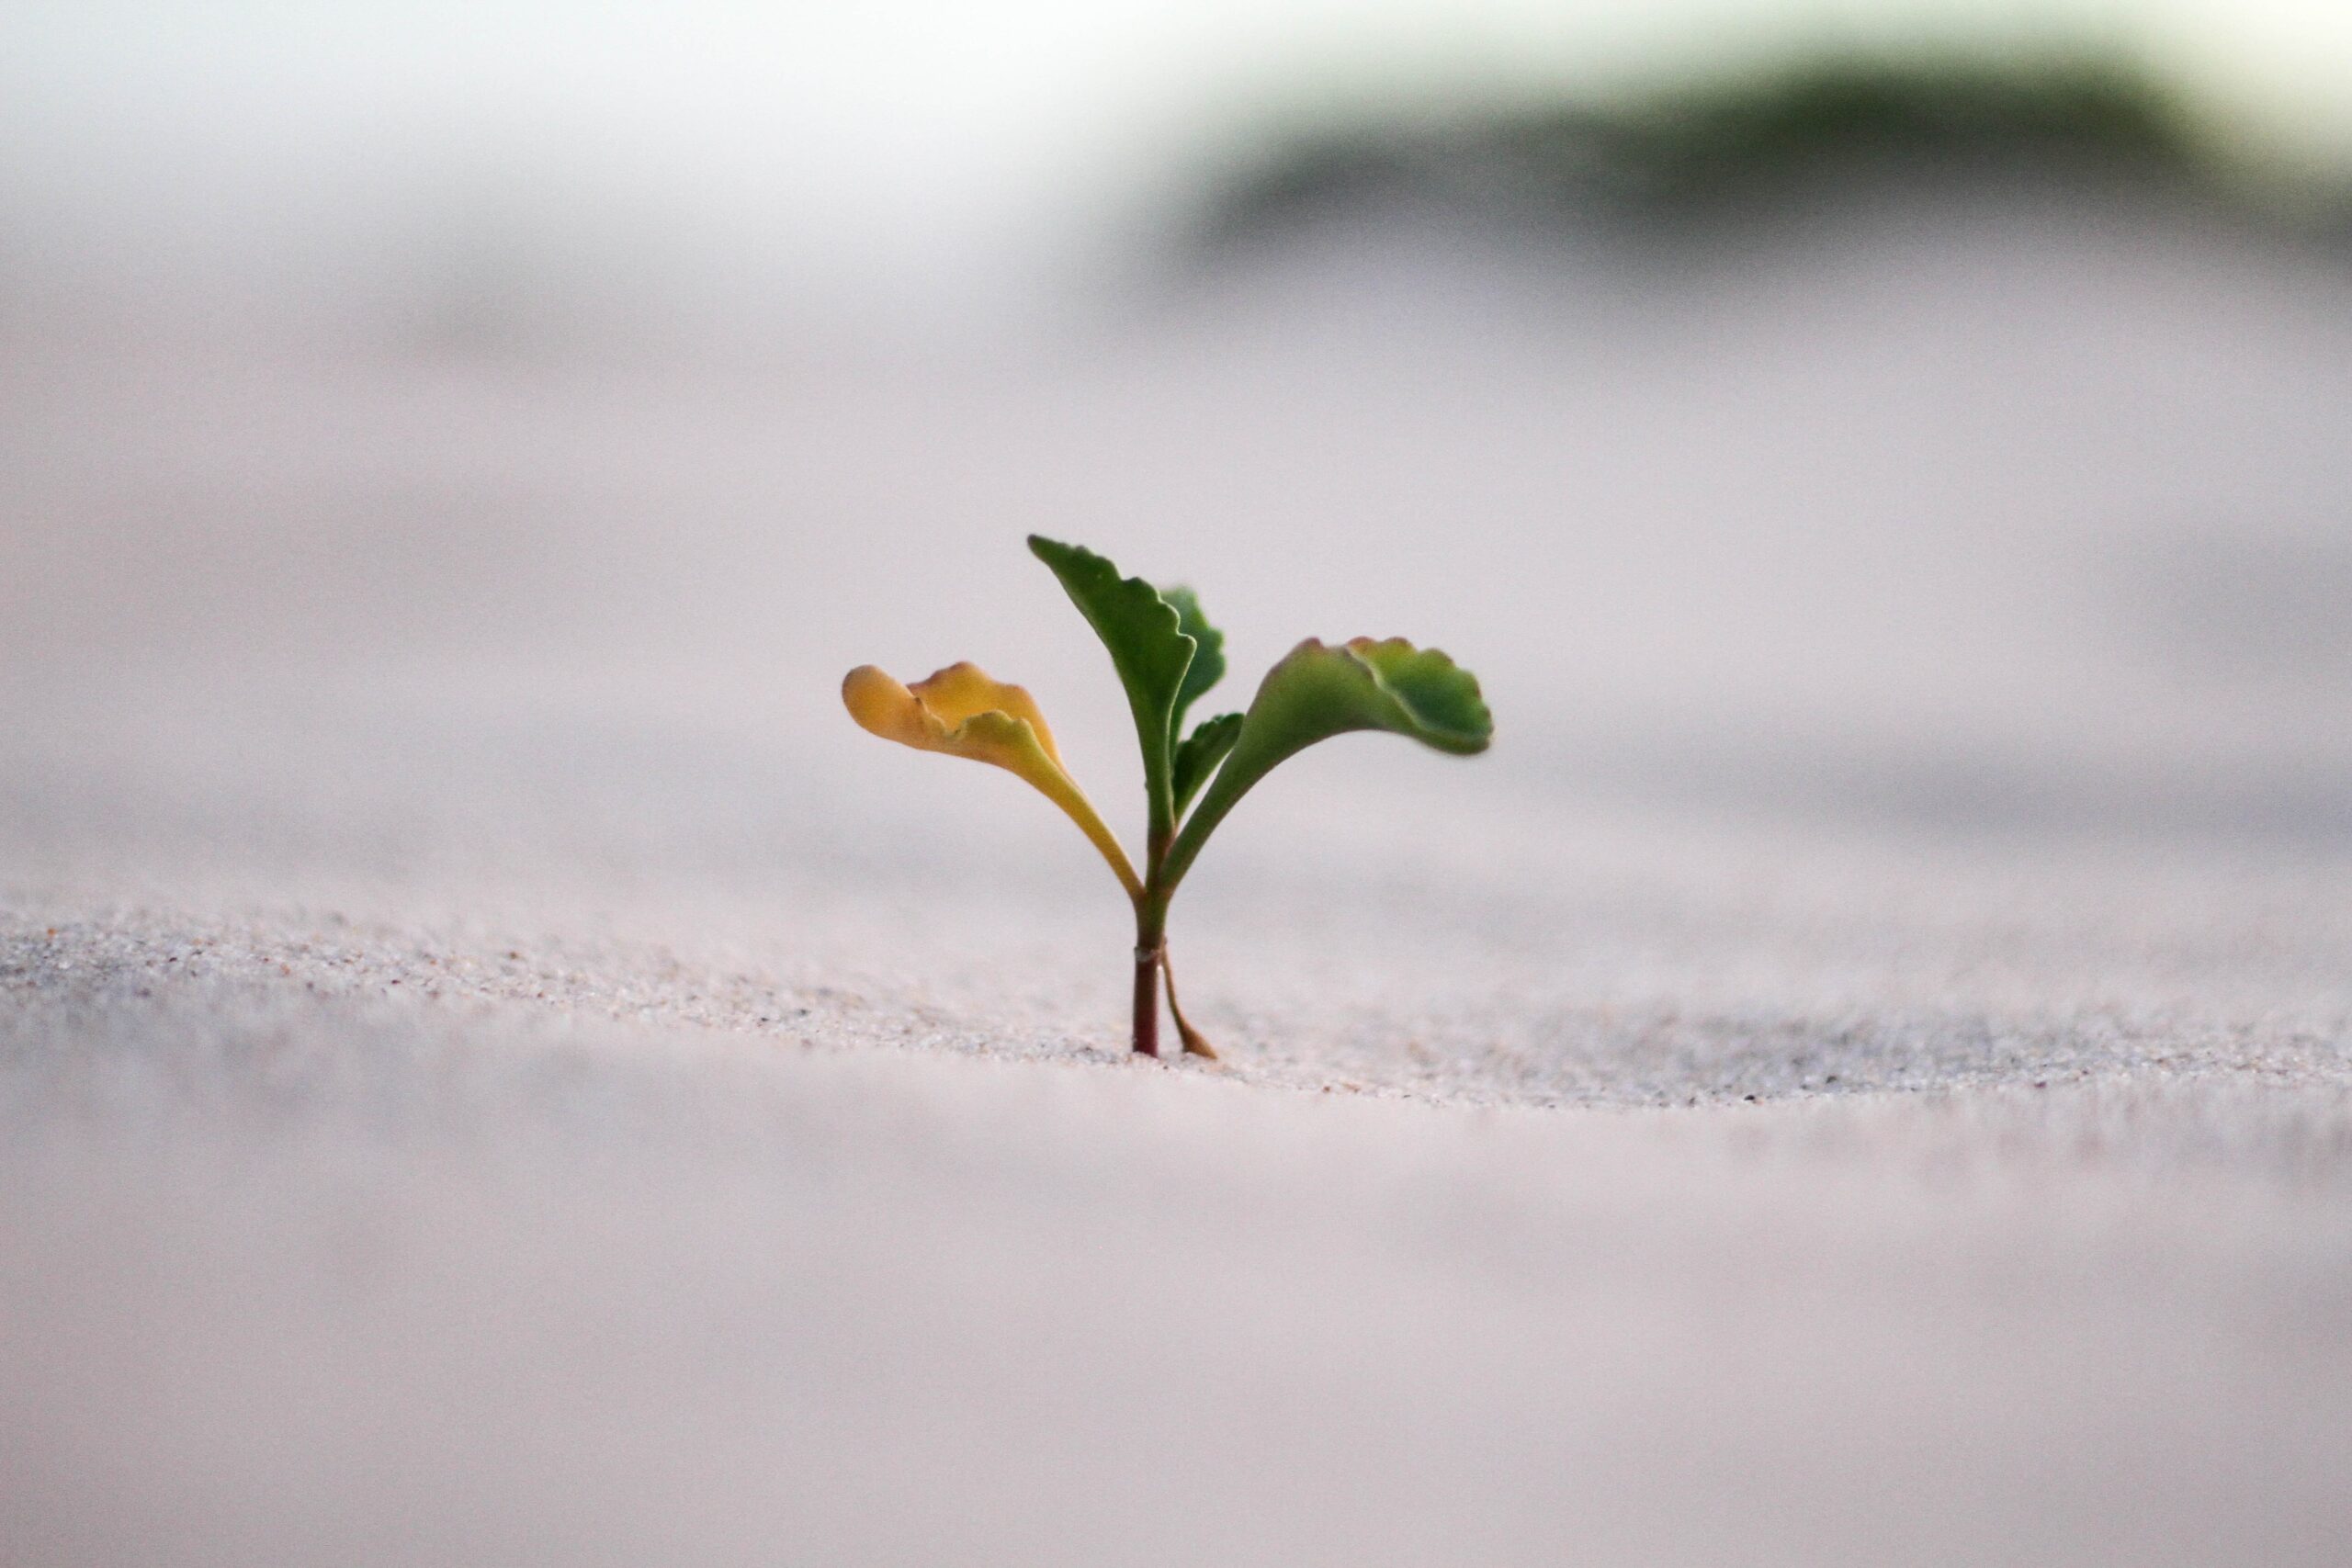 Small seedling sprouting out of sand